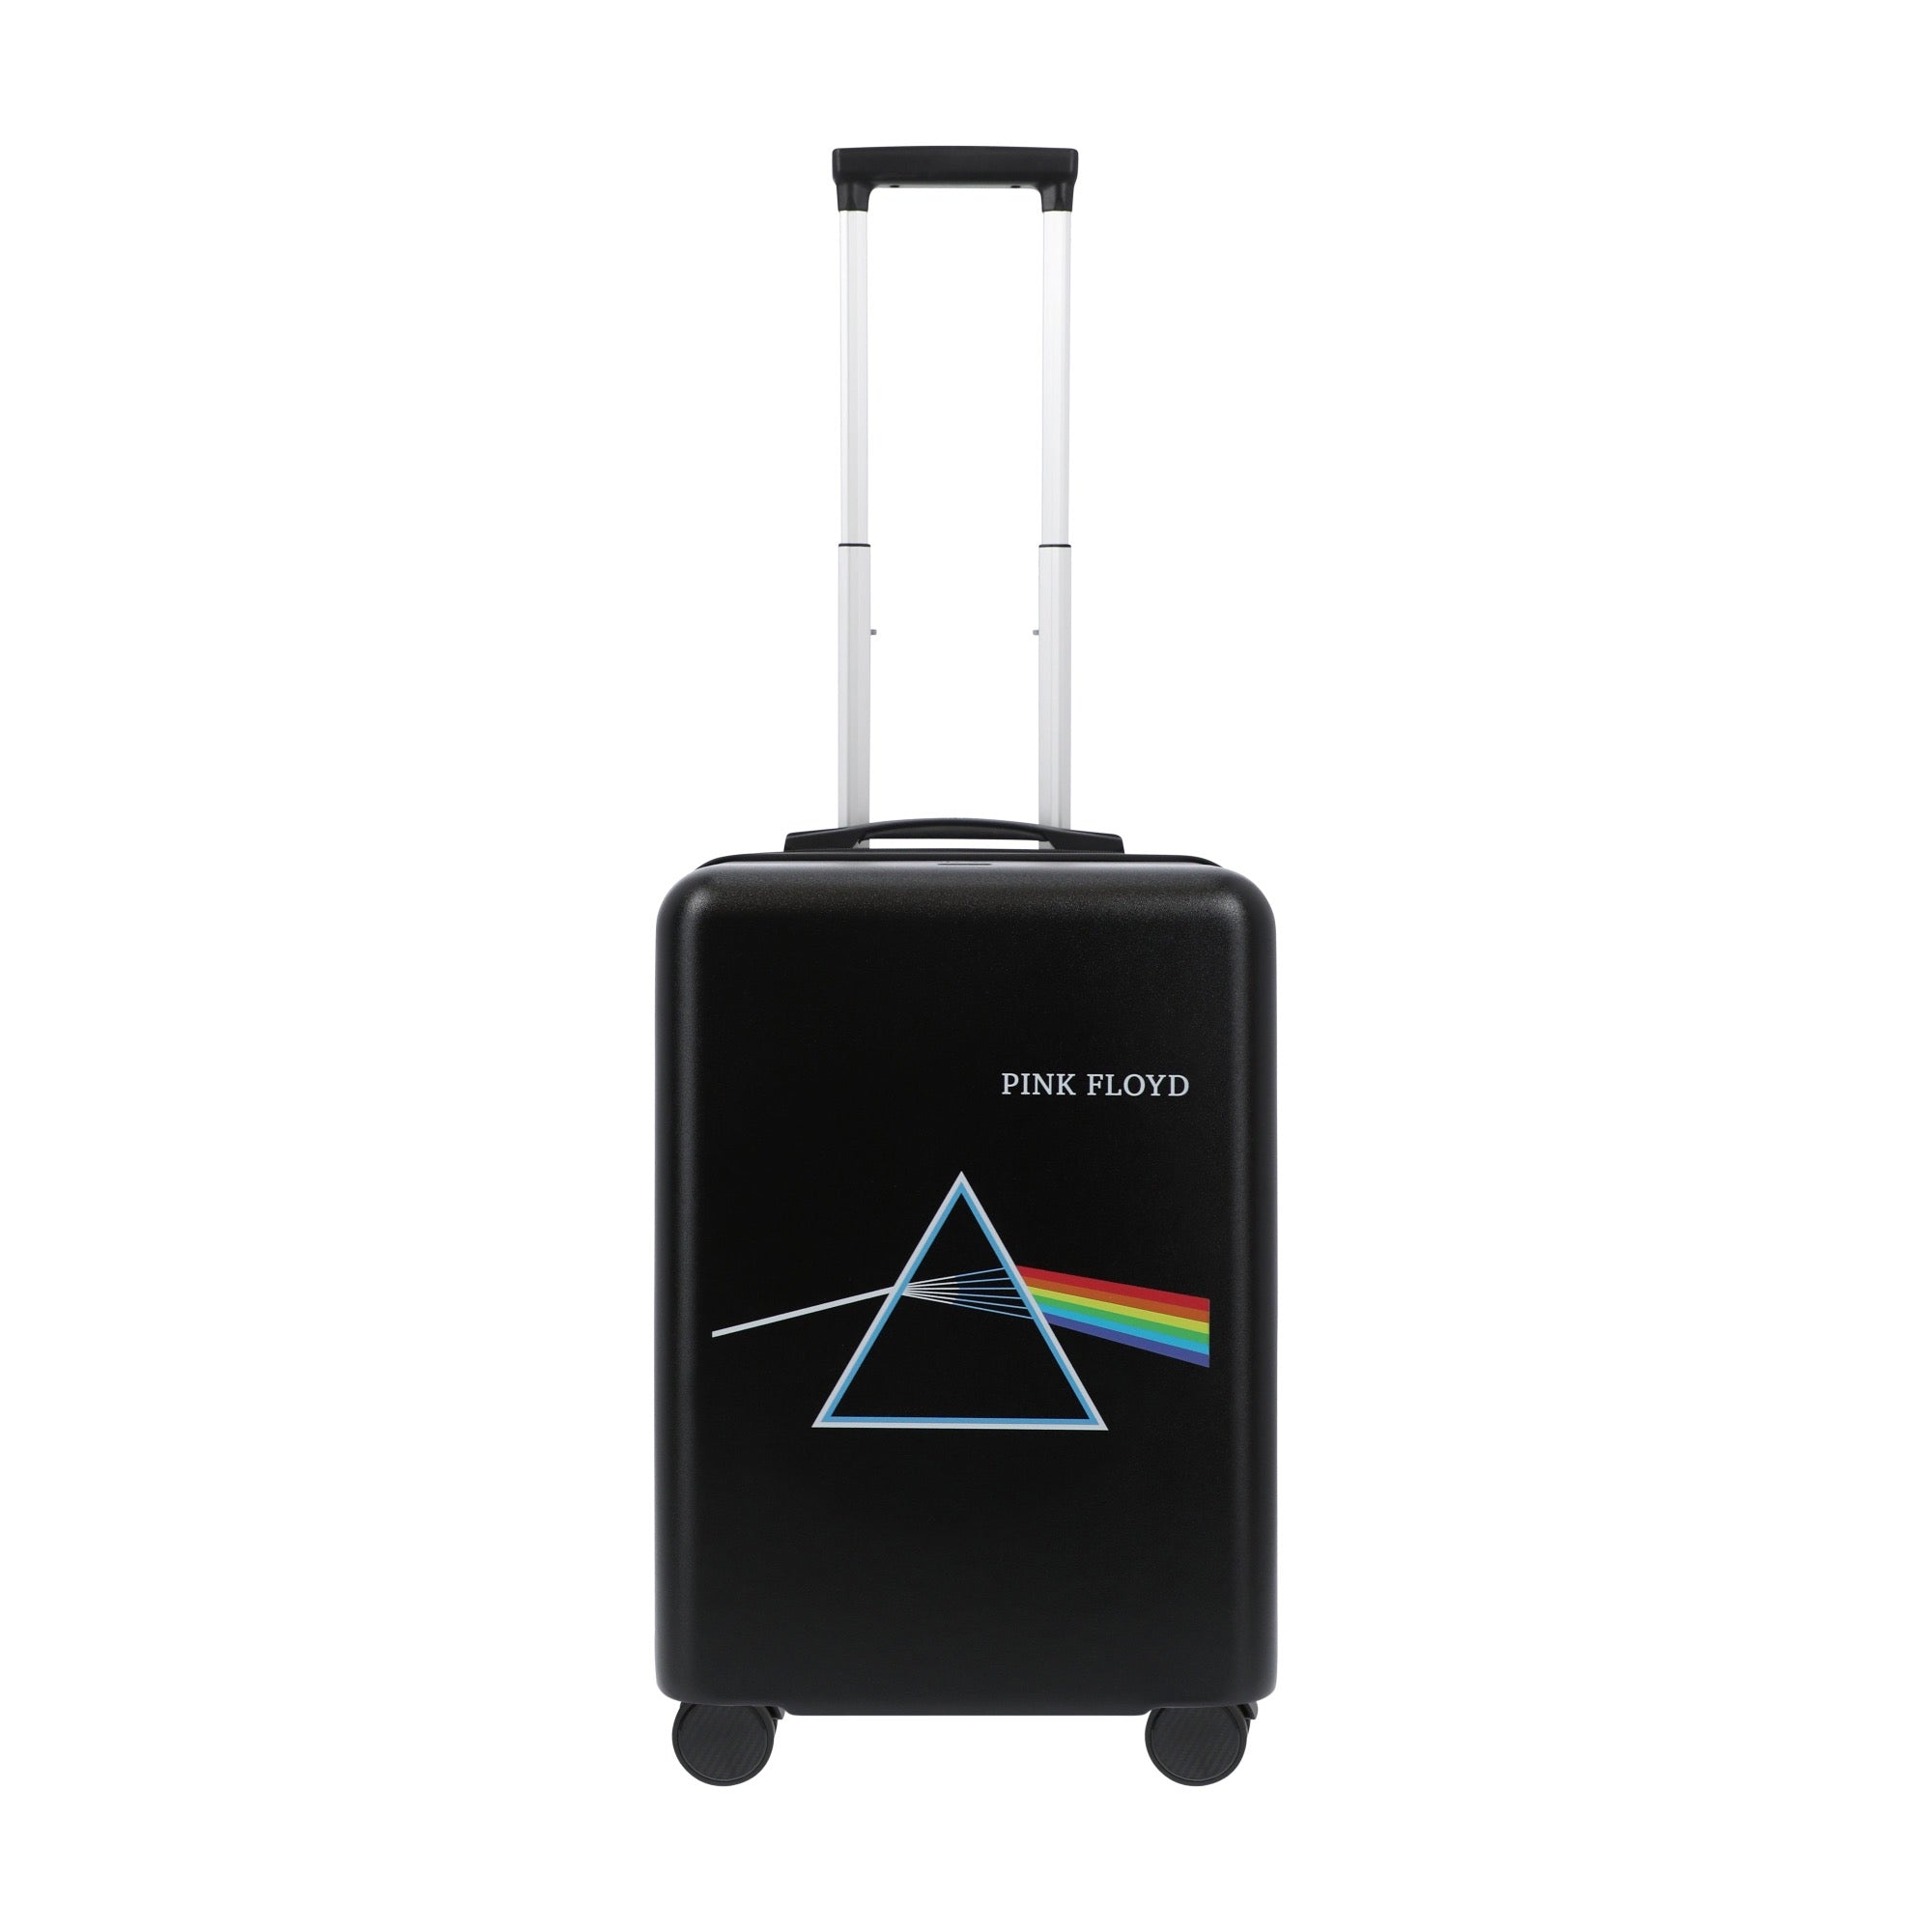 Pink Floyd 22.5" black carry-on spinner suitcase luggage by Ful